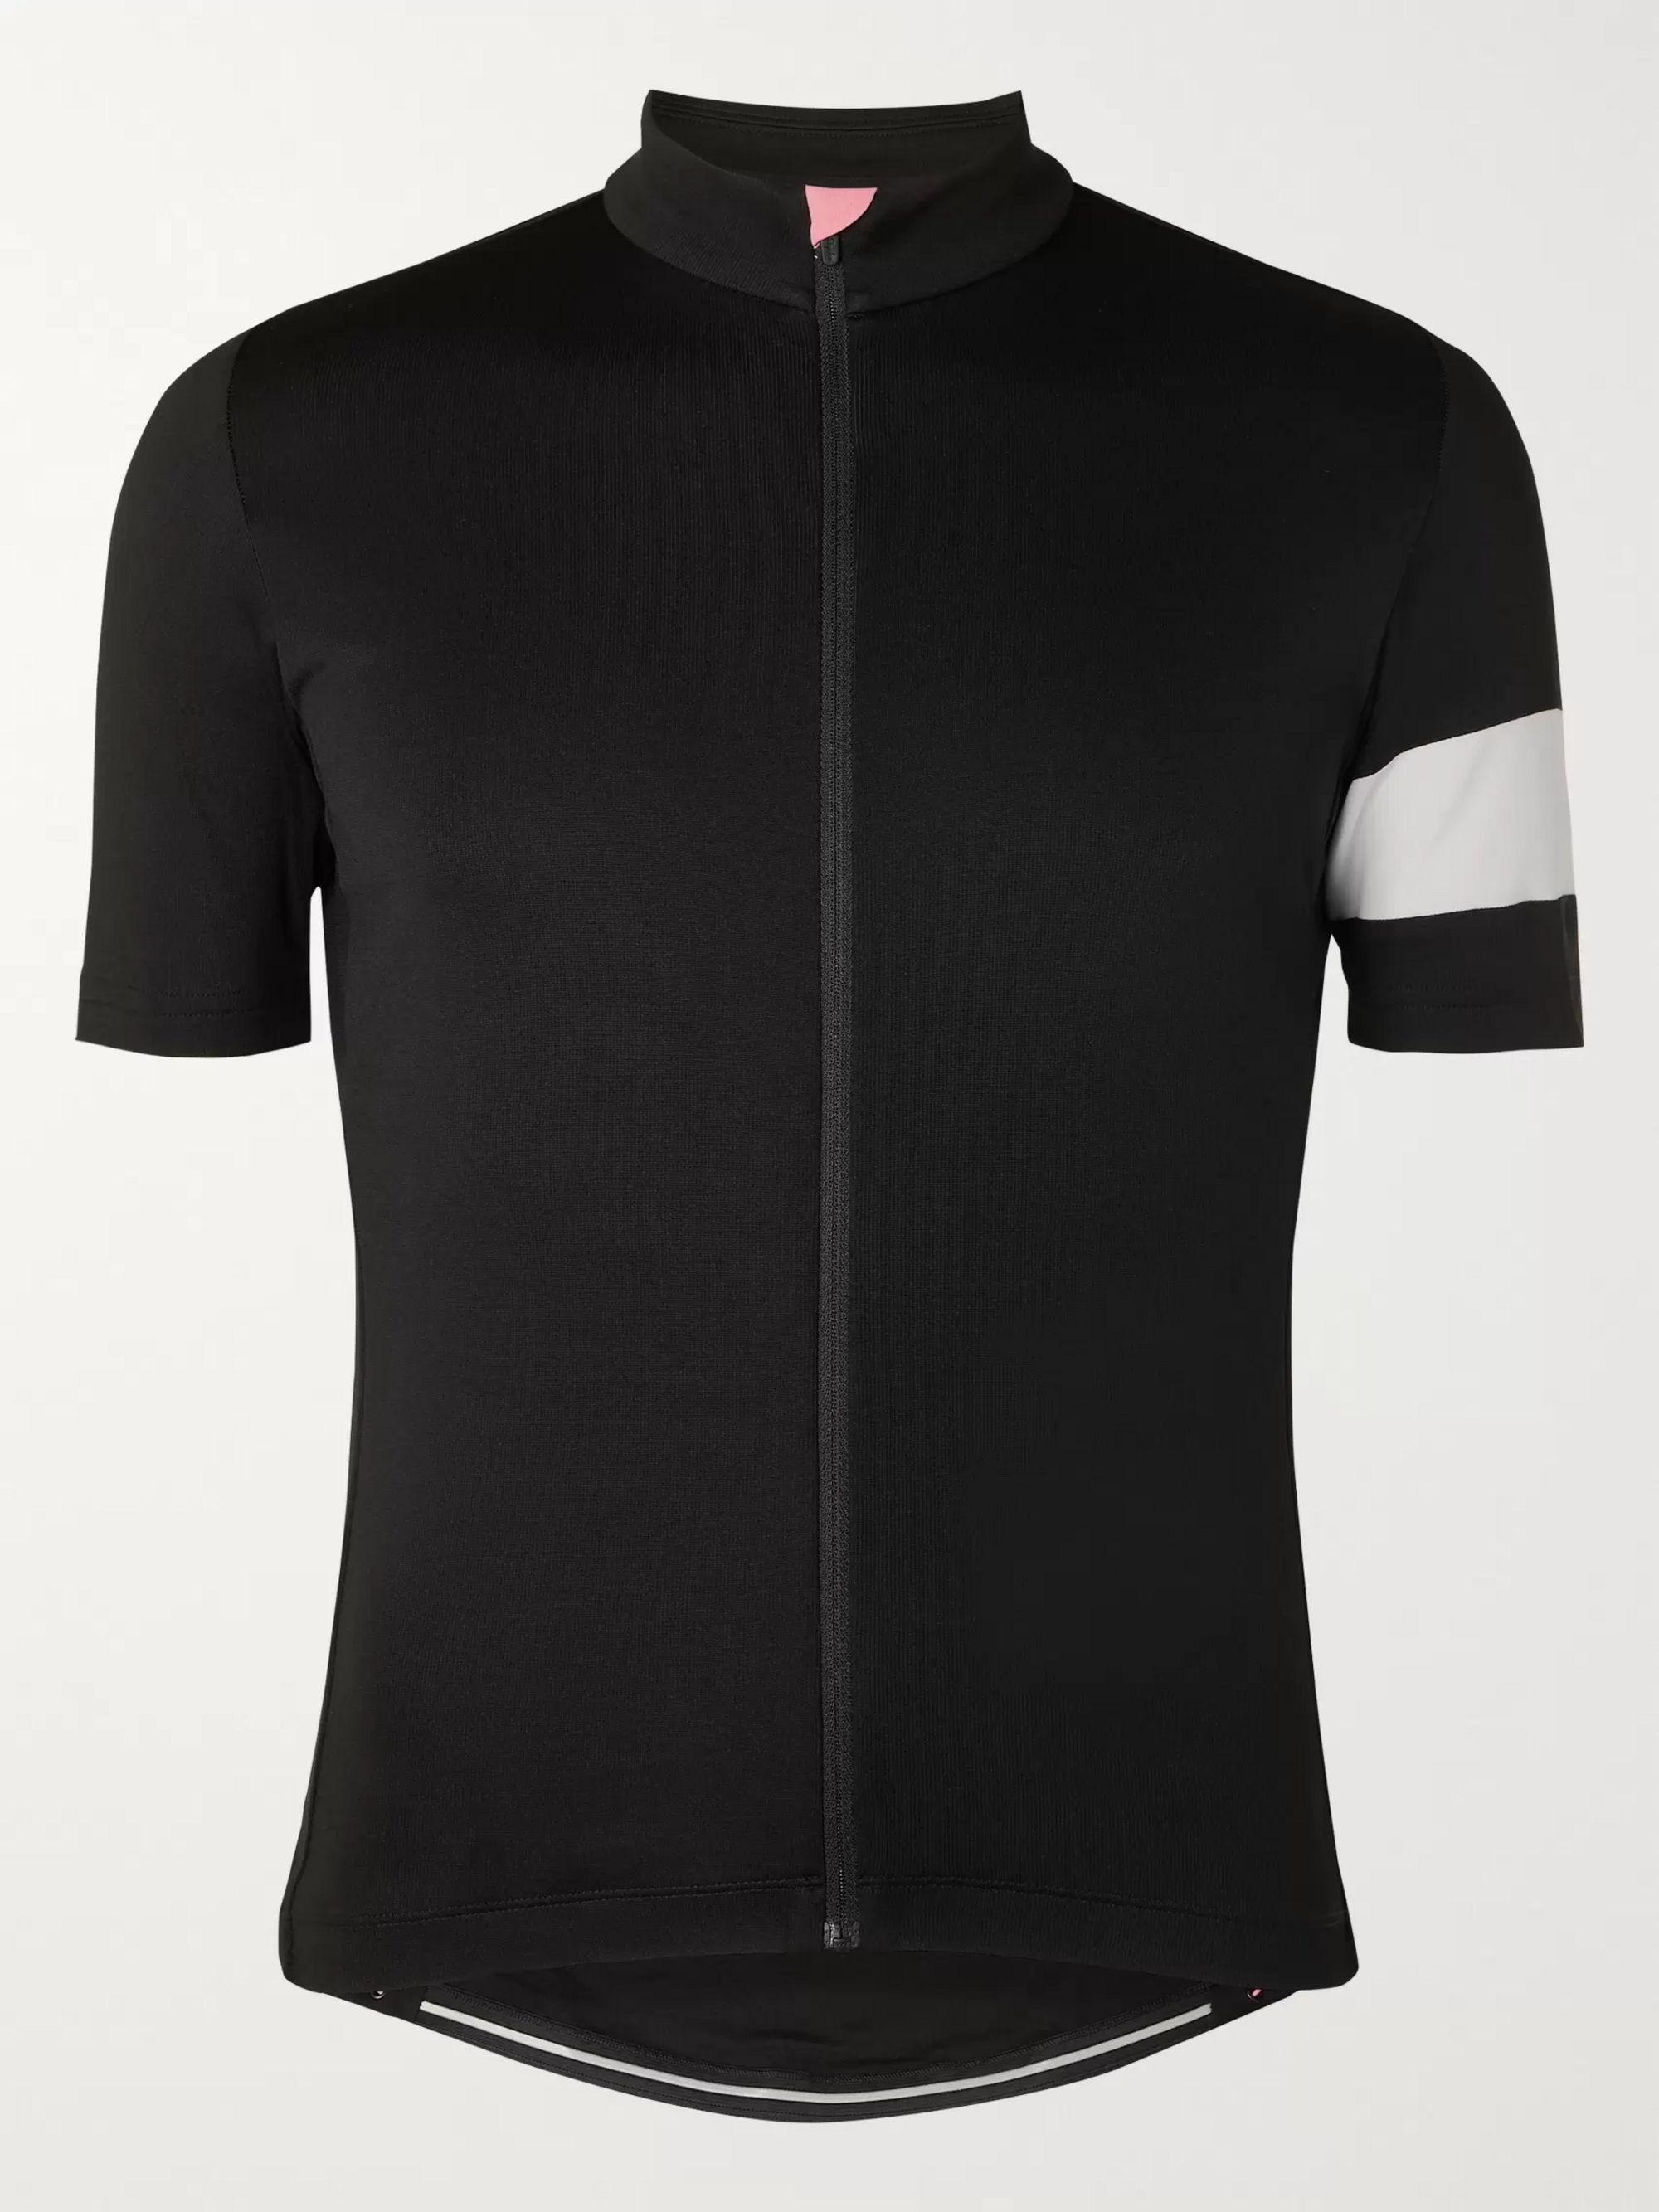 Classic Cycling Jersey | Rapha | MR PORTER